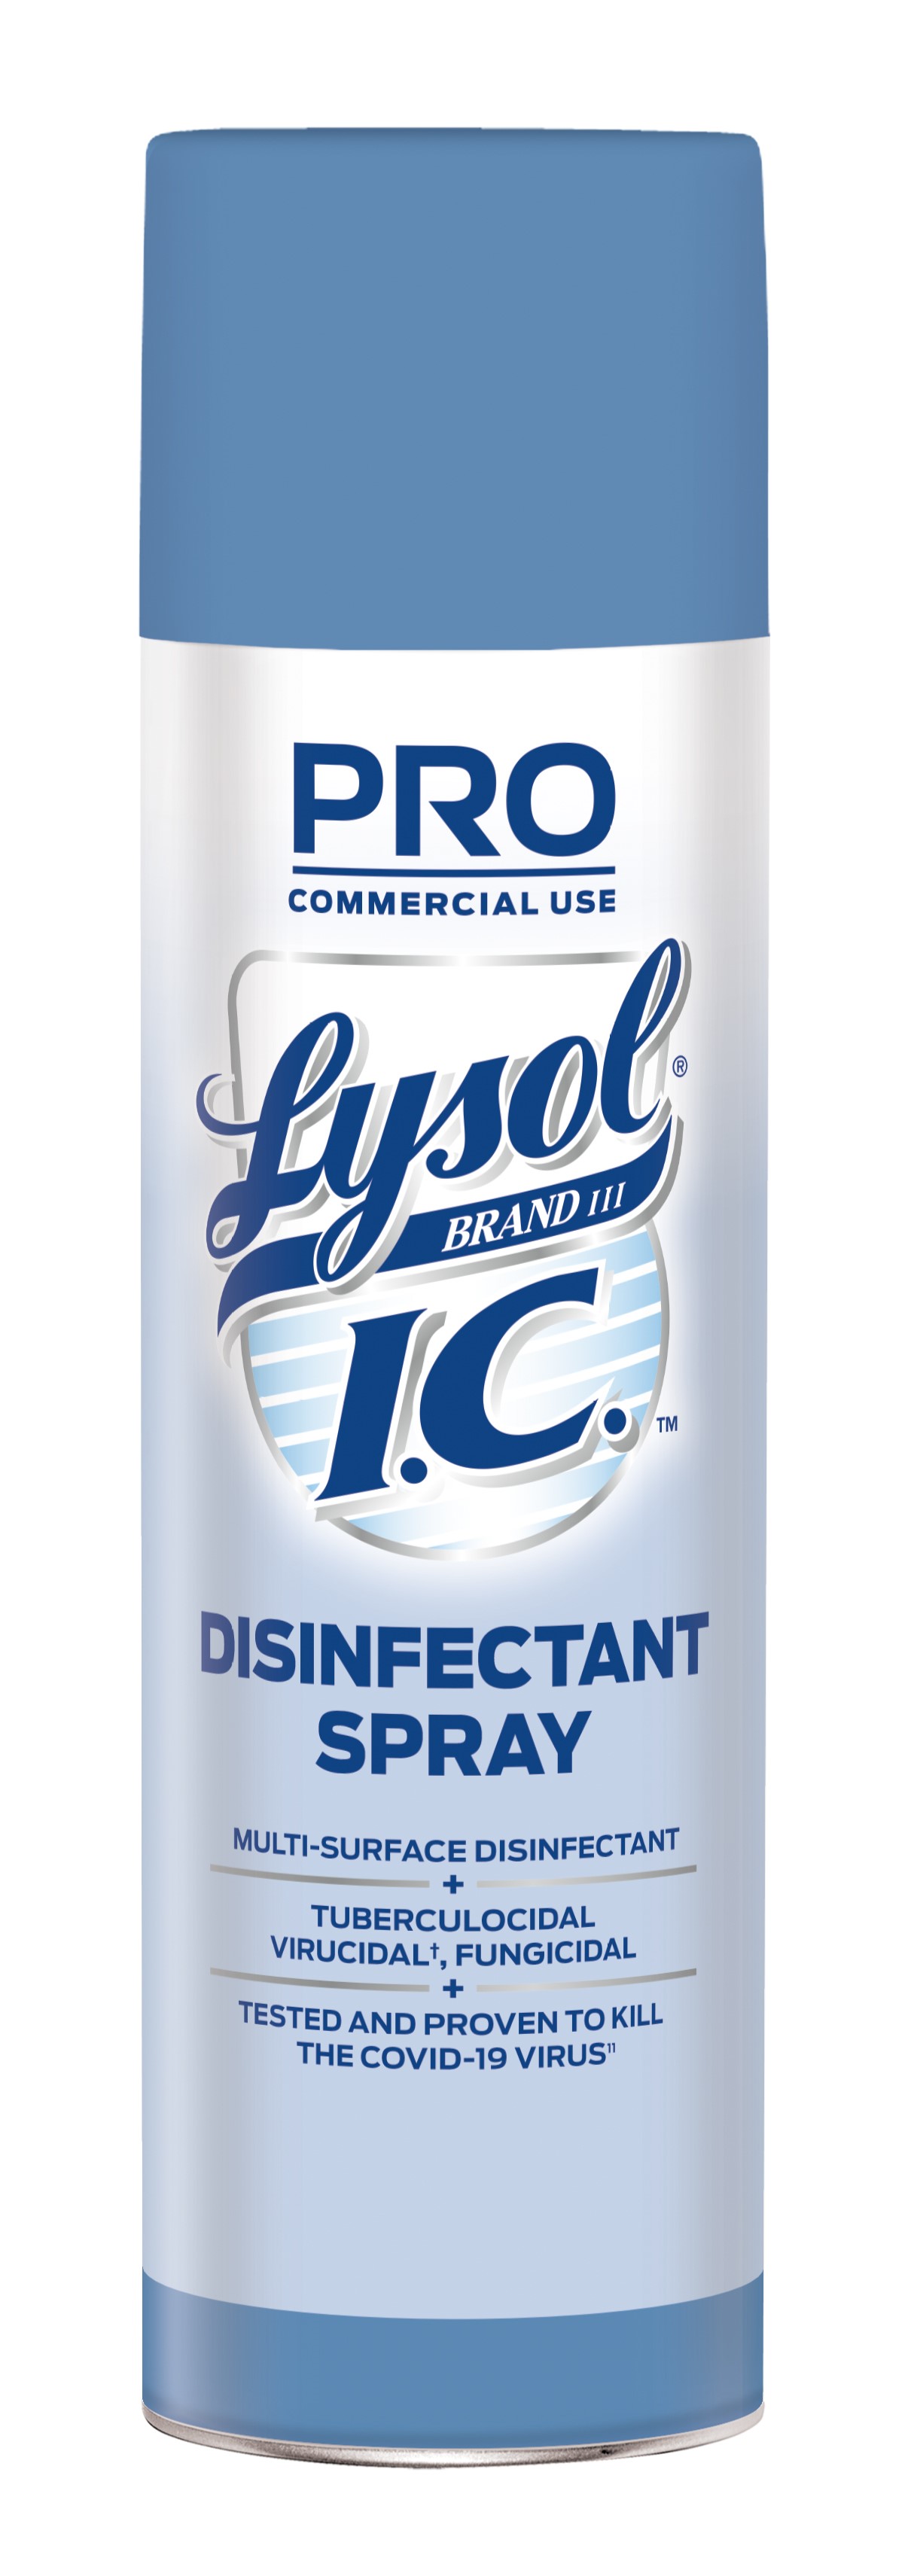 LYSOL IC Brand III Disinfectant Spray